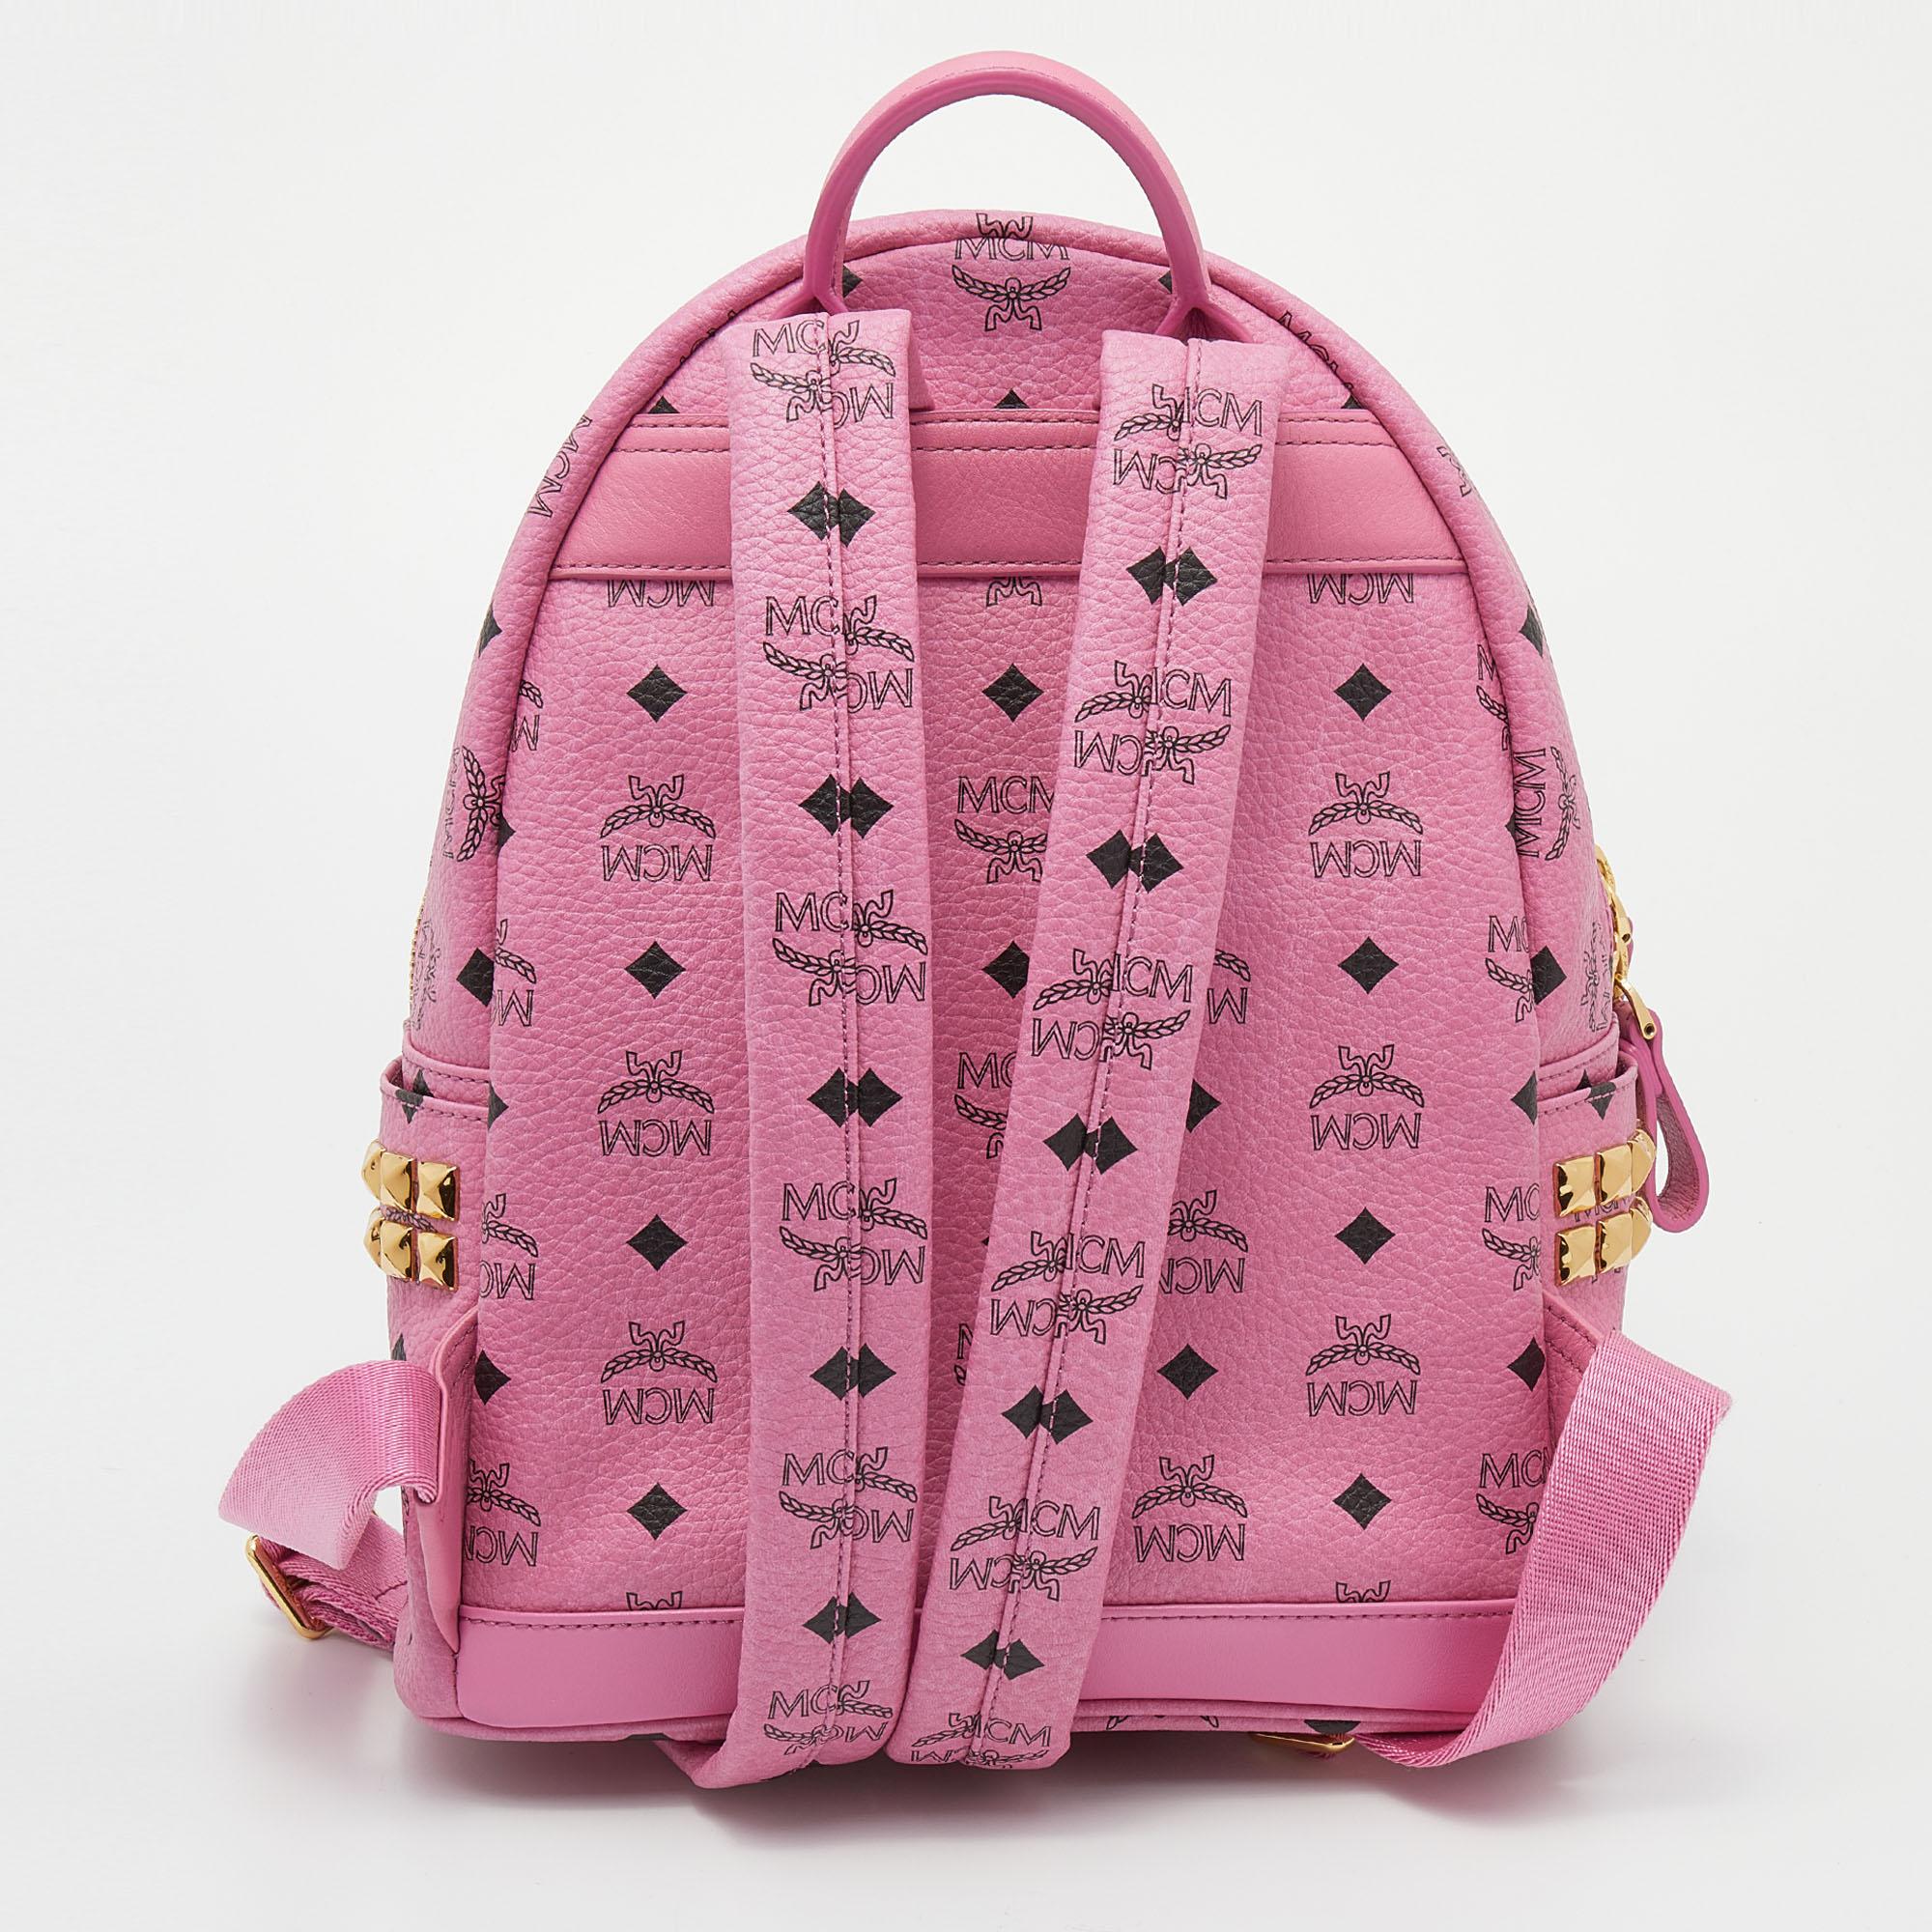 This pretty MCM backpack will come in handy for daily use or as a style statement. It is crafted from coated canvas and designed with stud embellishments, a front pocket, and a spacious interior secured by a zipper. Two shoulder straps and a small